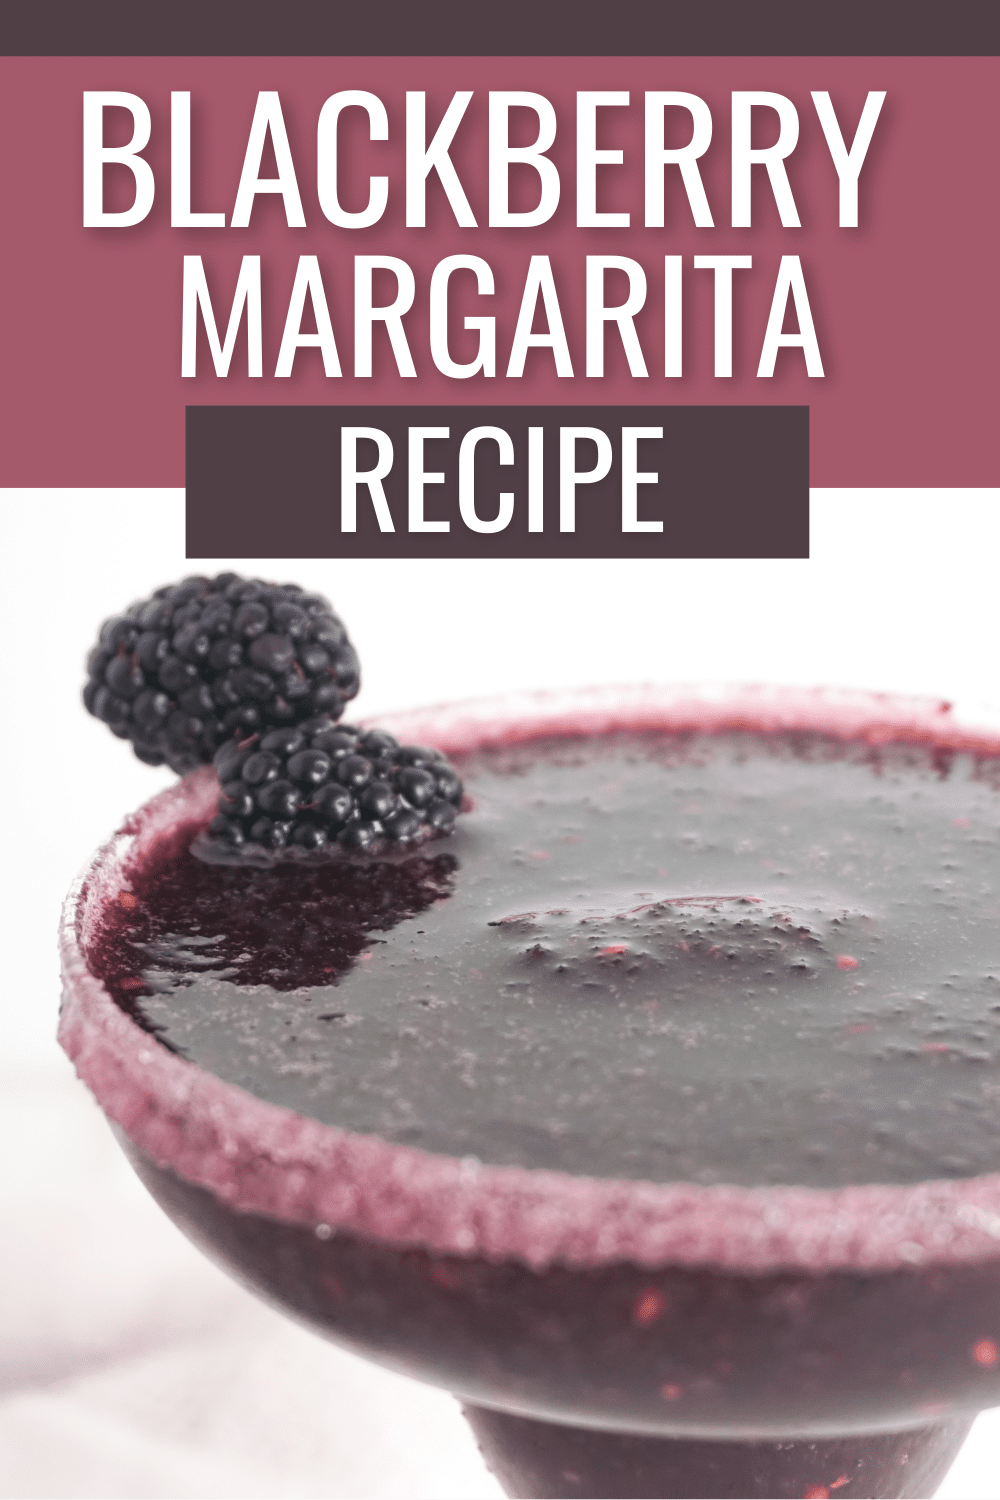 Blackberry Margarita Recipe: Explore a refreshing twist on the classic margarita by infusing it with luscious blackberries. Perfect for summer gatherings or cozy nights in, this easy-to